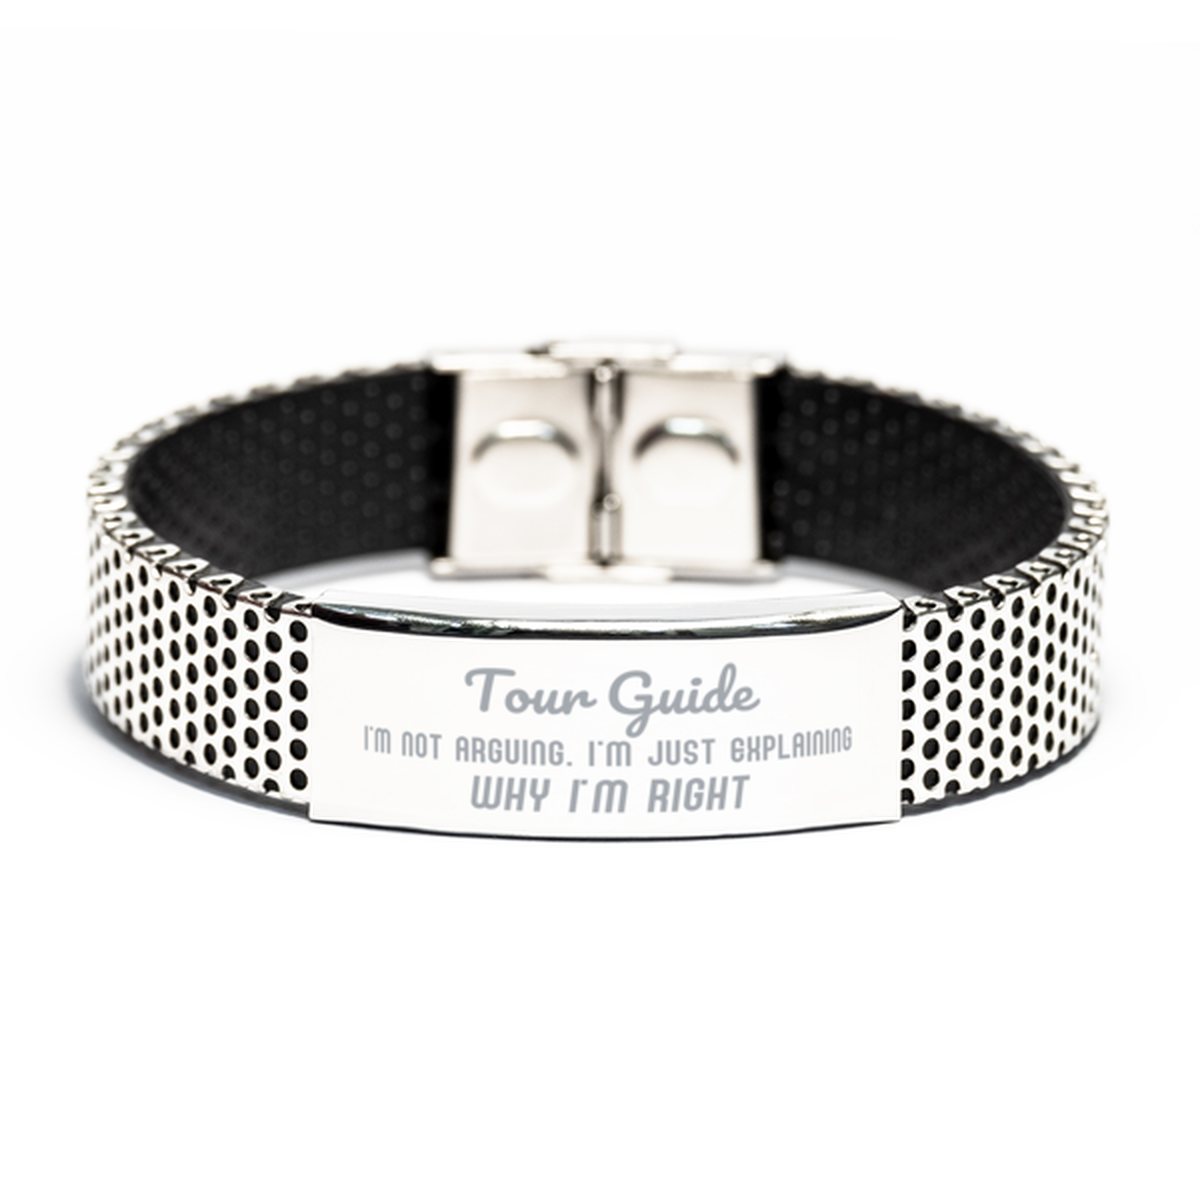 Tour Guide I'm not Arguing. I'm Just Explaining Why I'm RIGHT Stainless Steel Bracelet, Funny Saying Quote Tour Guide Gifts For Tour Guide Graduation Birthday Christmas Gifts for Men Women Coworker